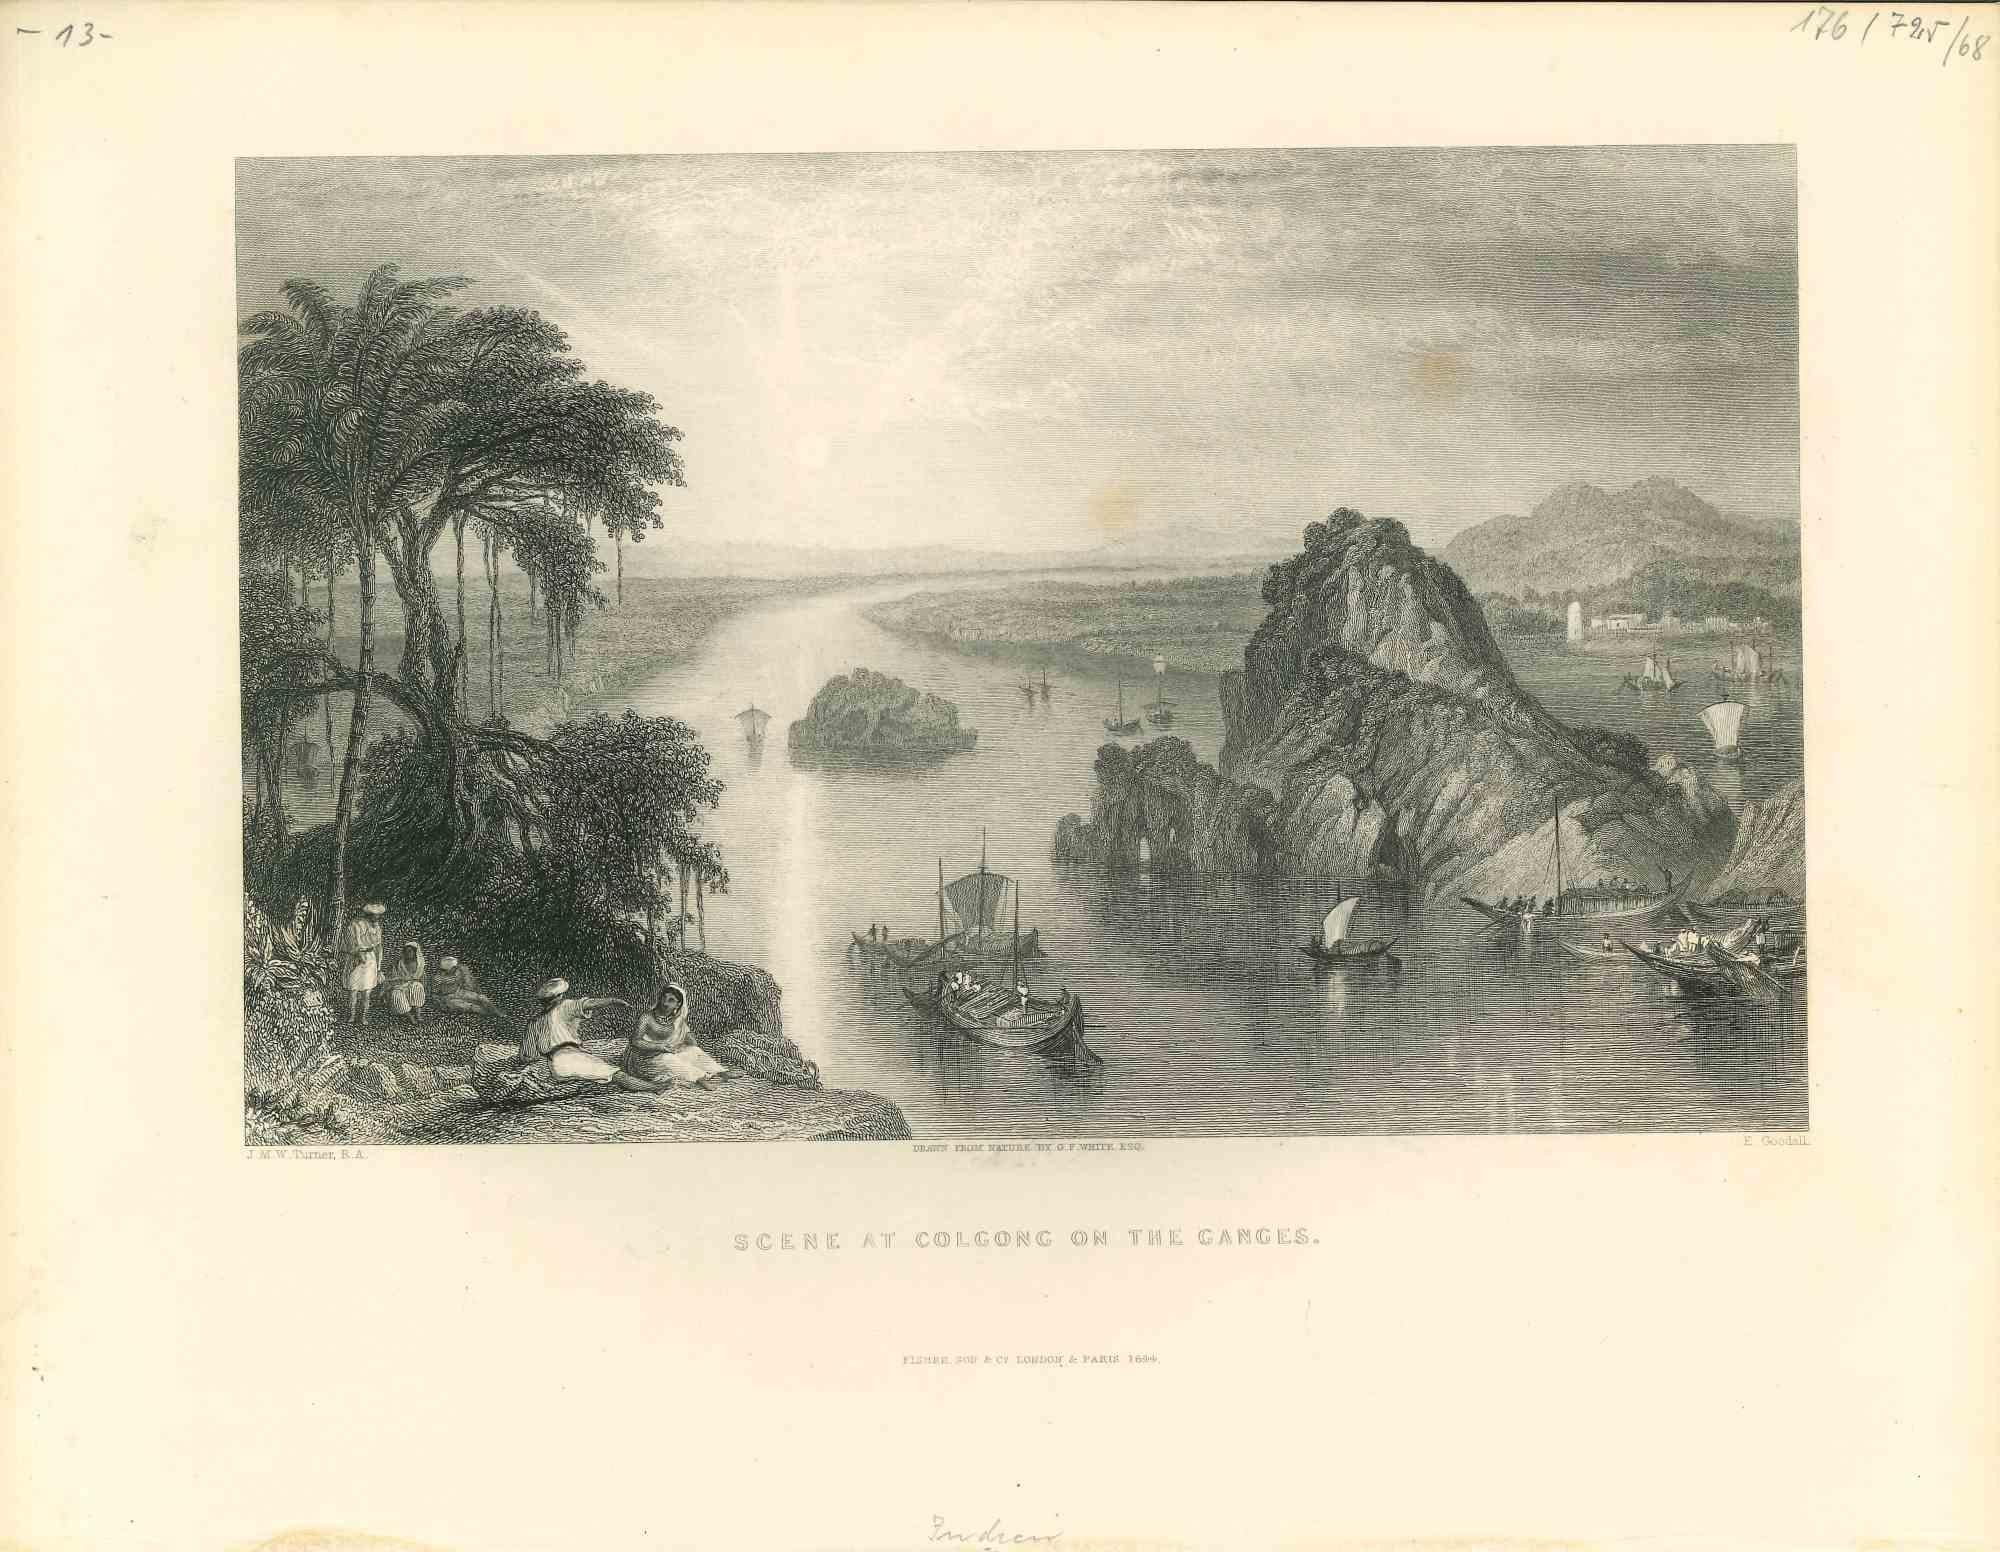 Unknown Figurative Print - Scene at Colgong on the Ganges - Original Lithograph - Early 19th Century